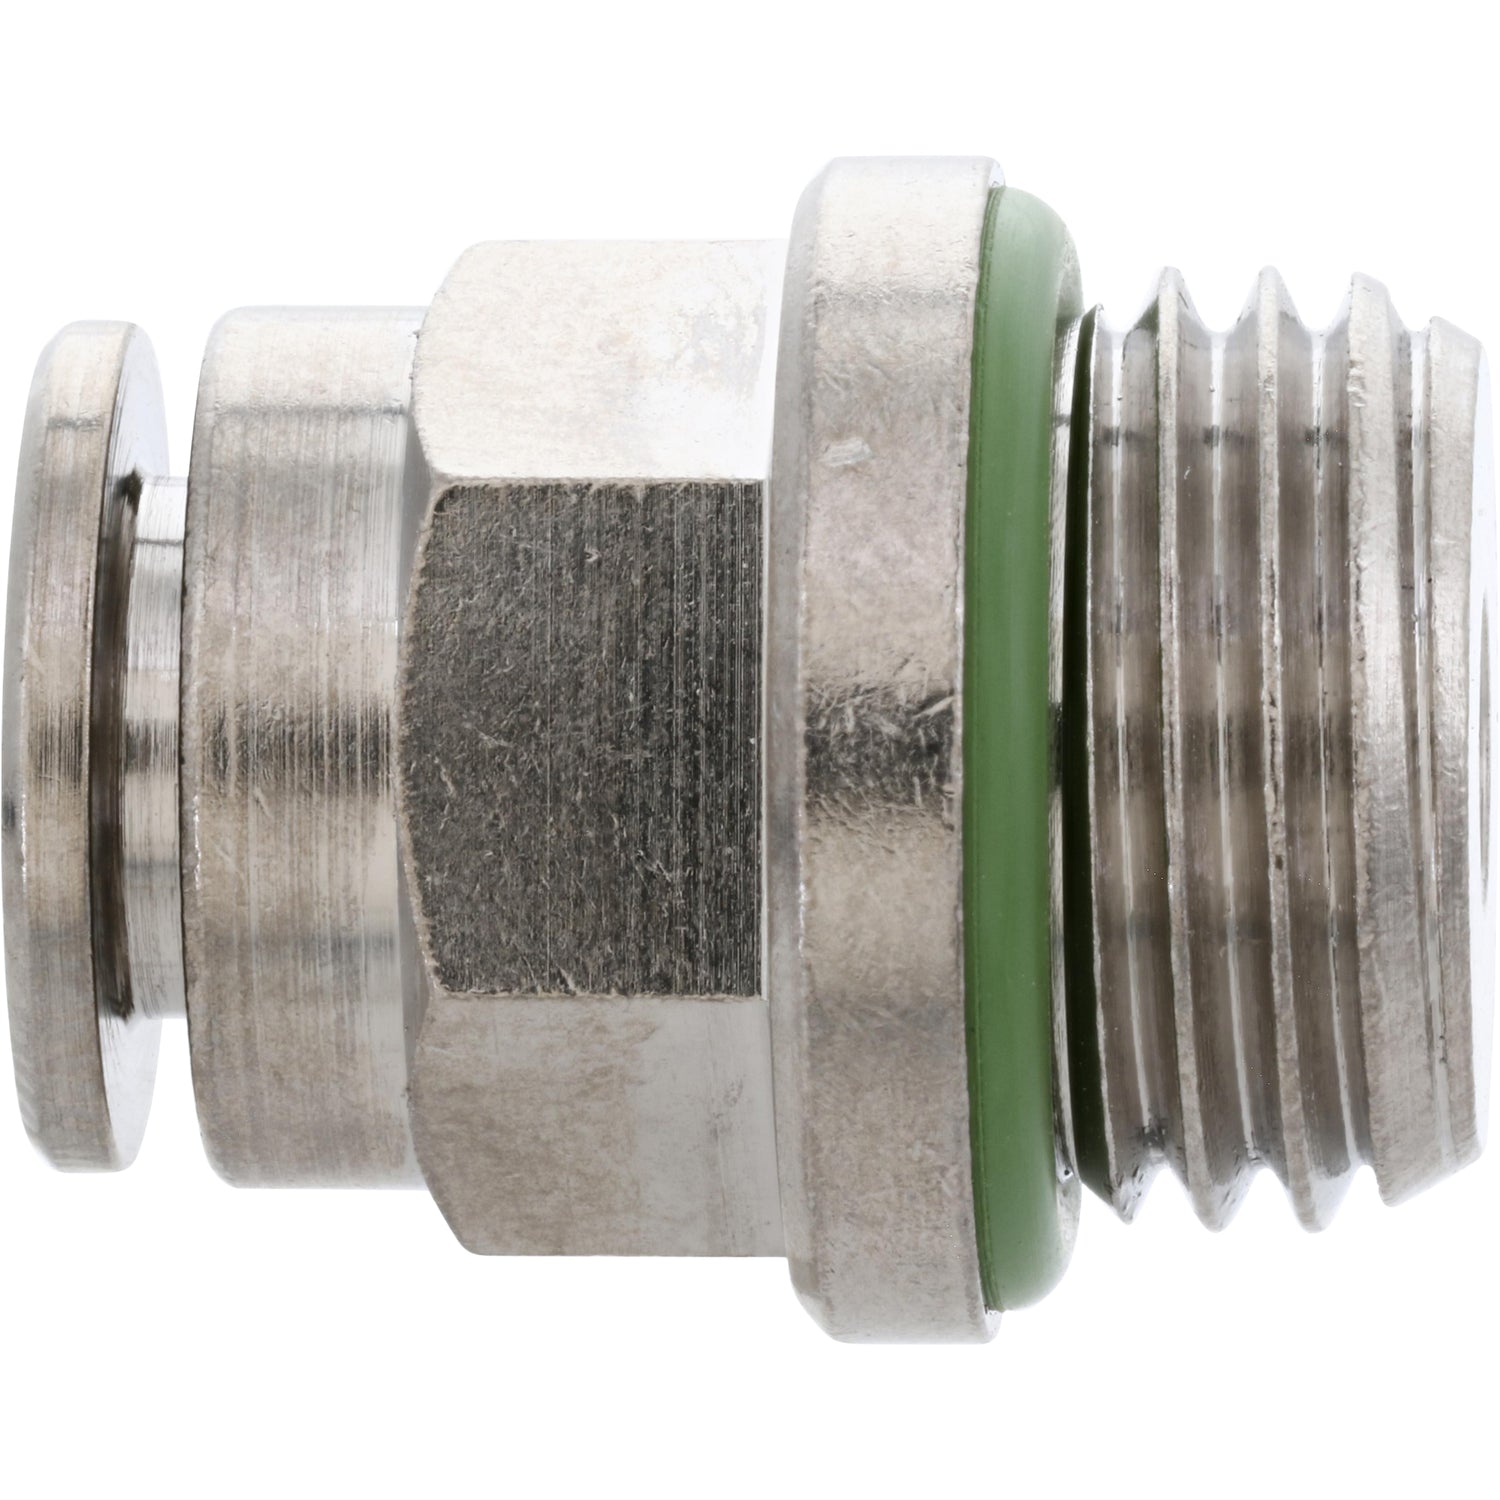 Nickel-Plated push-in fitting with push collar, green rubber o-ring and threads. Part shown on white background.